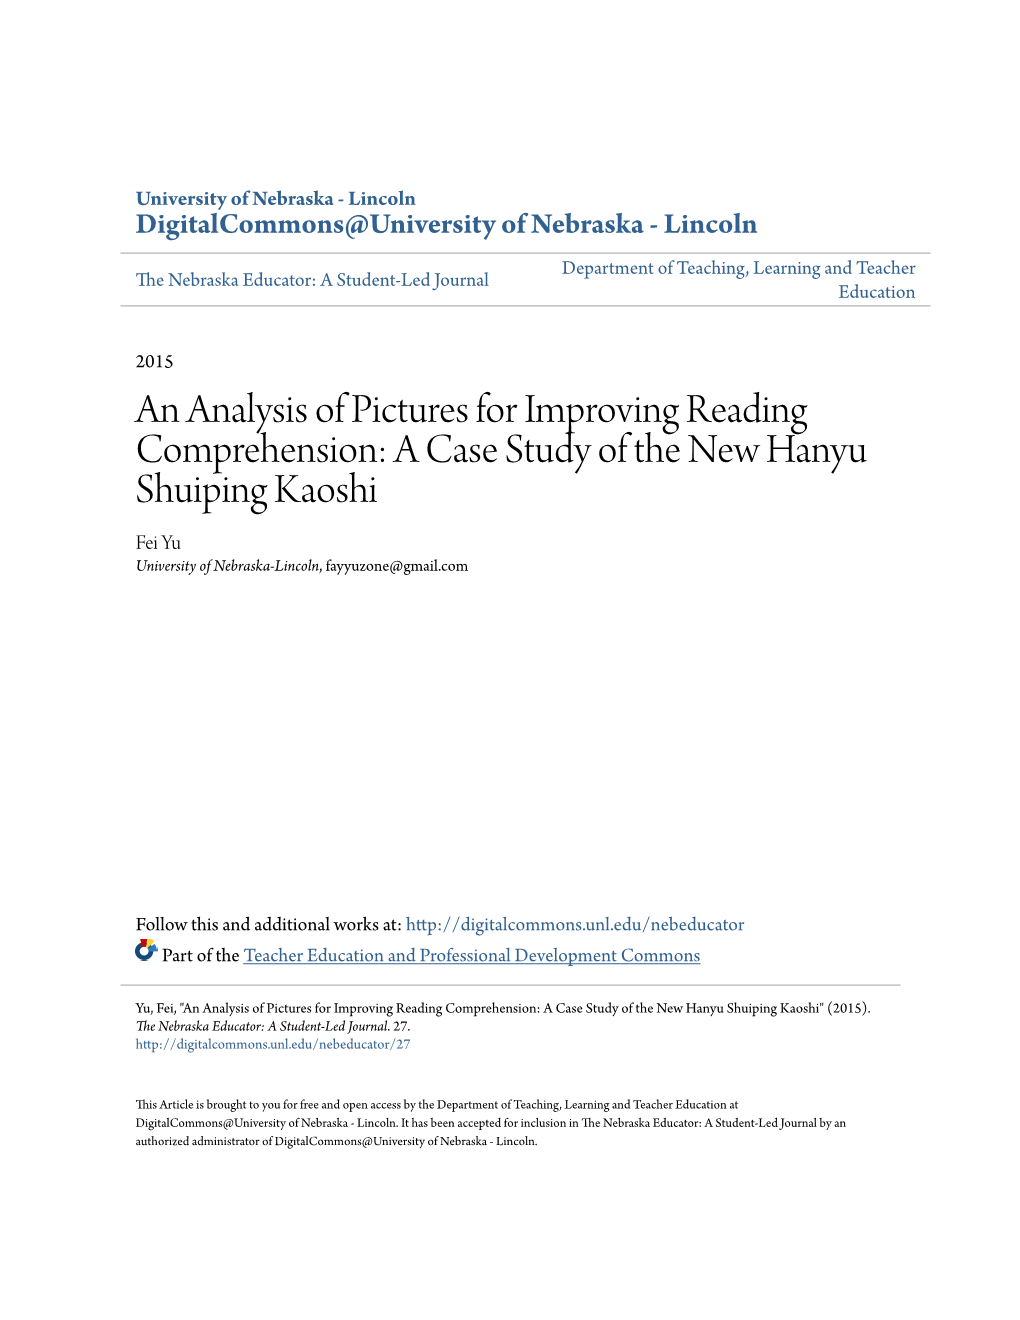 An Analysis of Pictures for Improving Reading Comprehension: a Case Study of the New Hanyu Shuiping Kaoshi Fei Yu University of Nebraska-Lincoln, Fayyuzone@Gmail.Com